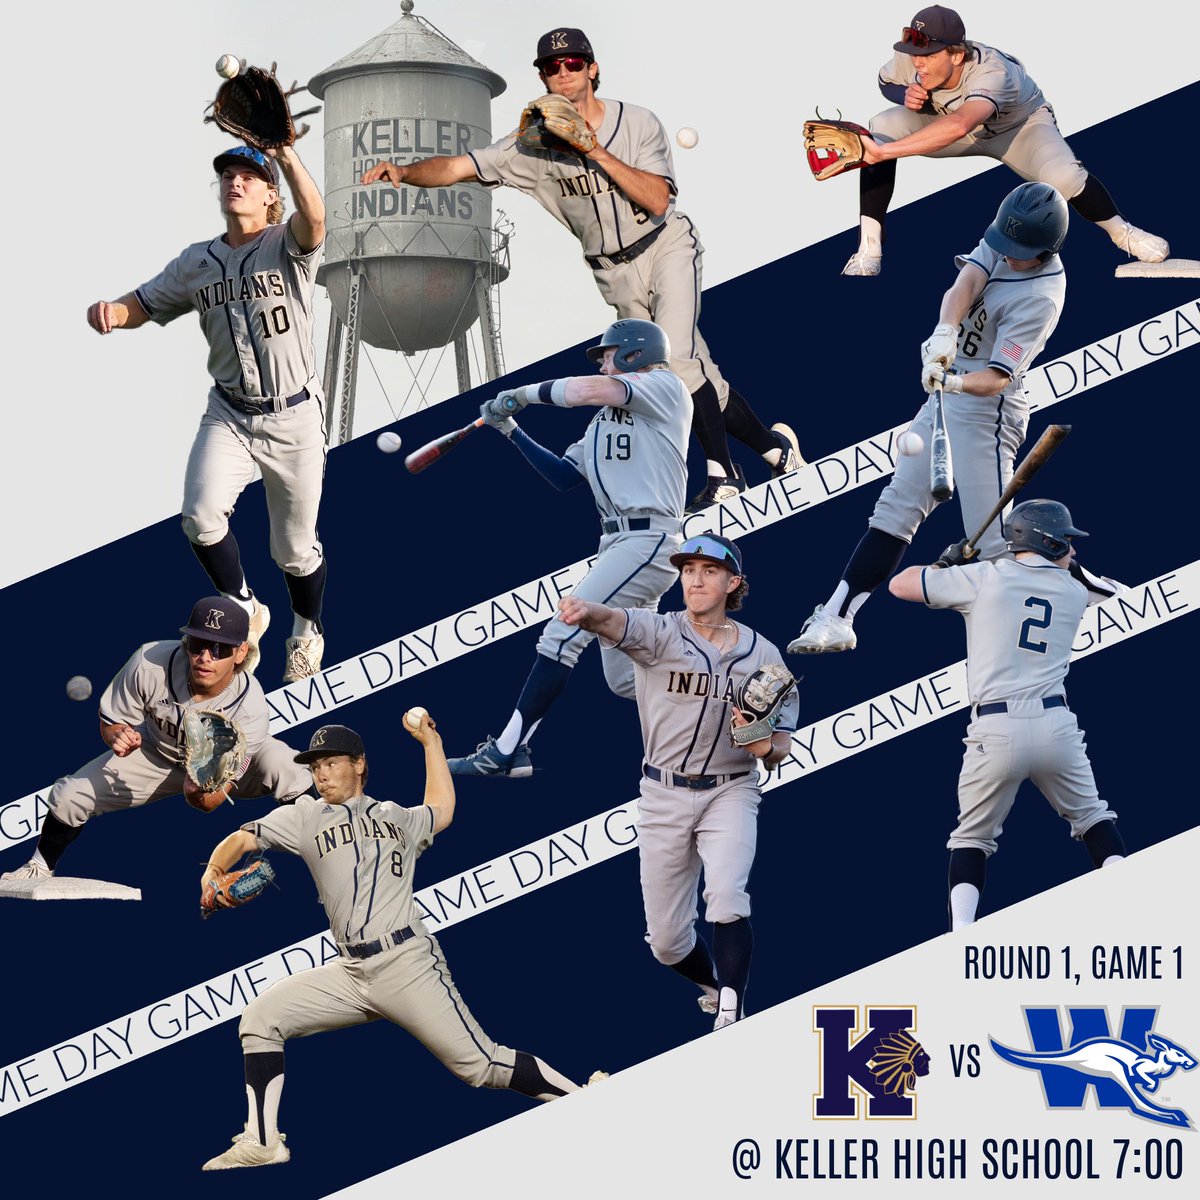 IT’S PLAYOFF TIME!!! 

Round 1, Game 1 TONIGHT!!
Keller VS Weatherford
📍 Keller High School
⏰ 7:00 PM
📣 BRING YOUR NOISE MAKERS, WEAR YOUR SPIRIT WEAR!! Let’s GO!!!! ⚾️💛💙